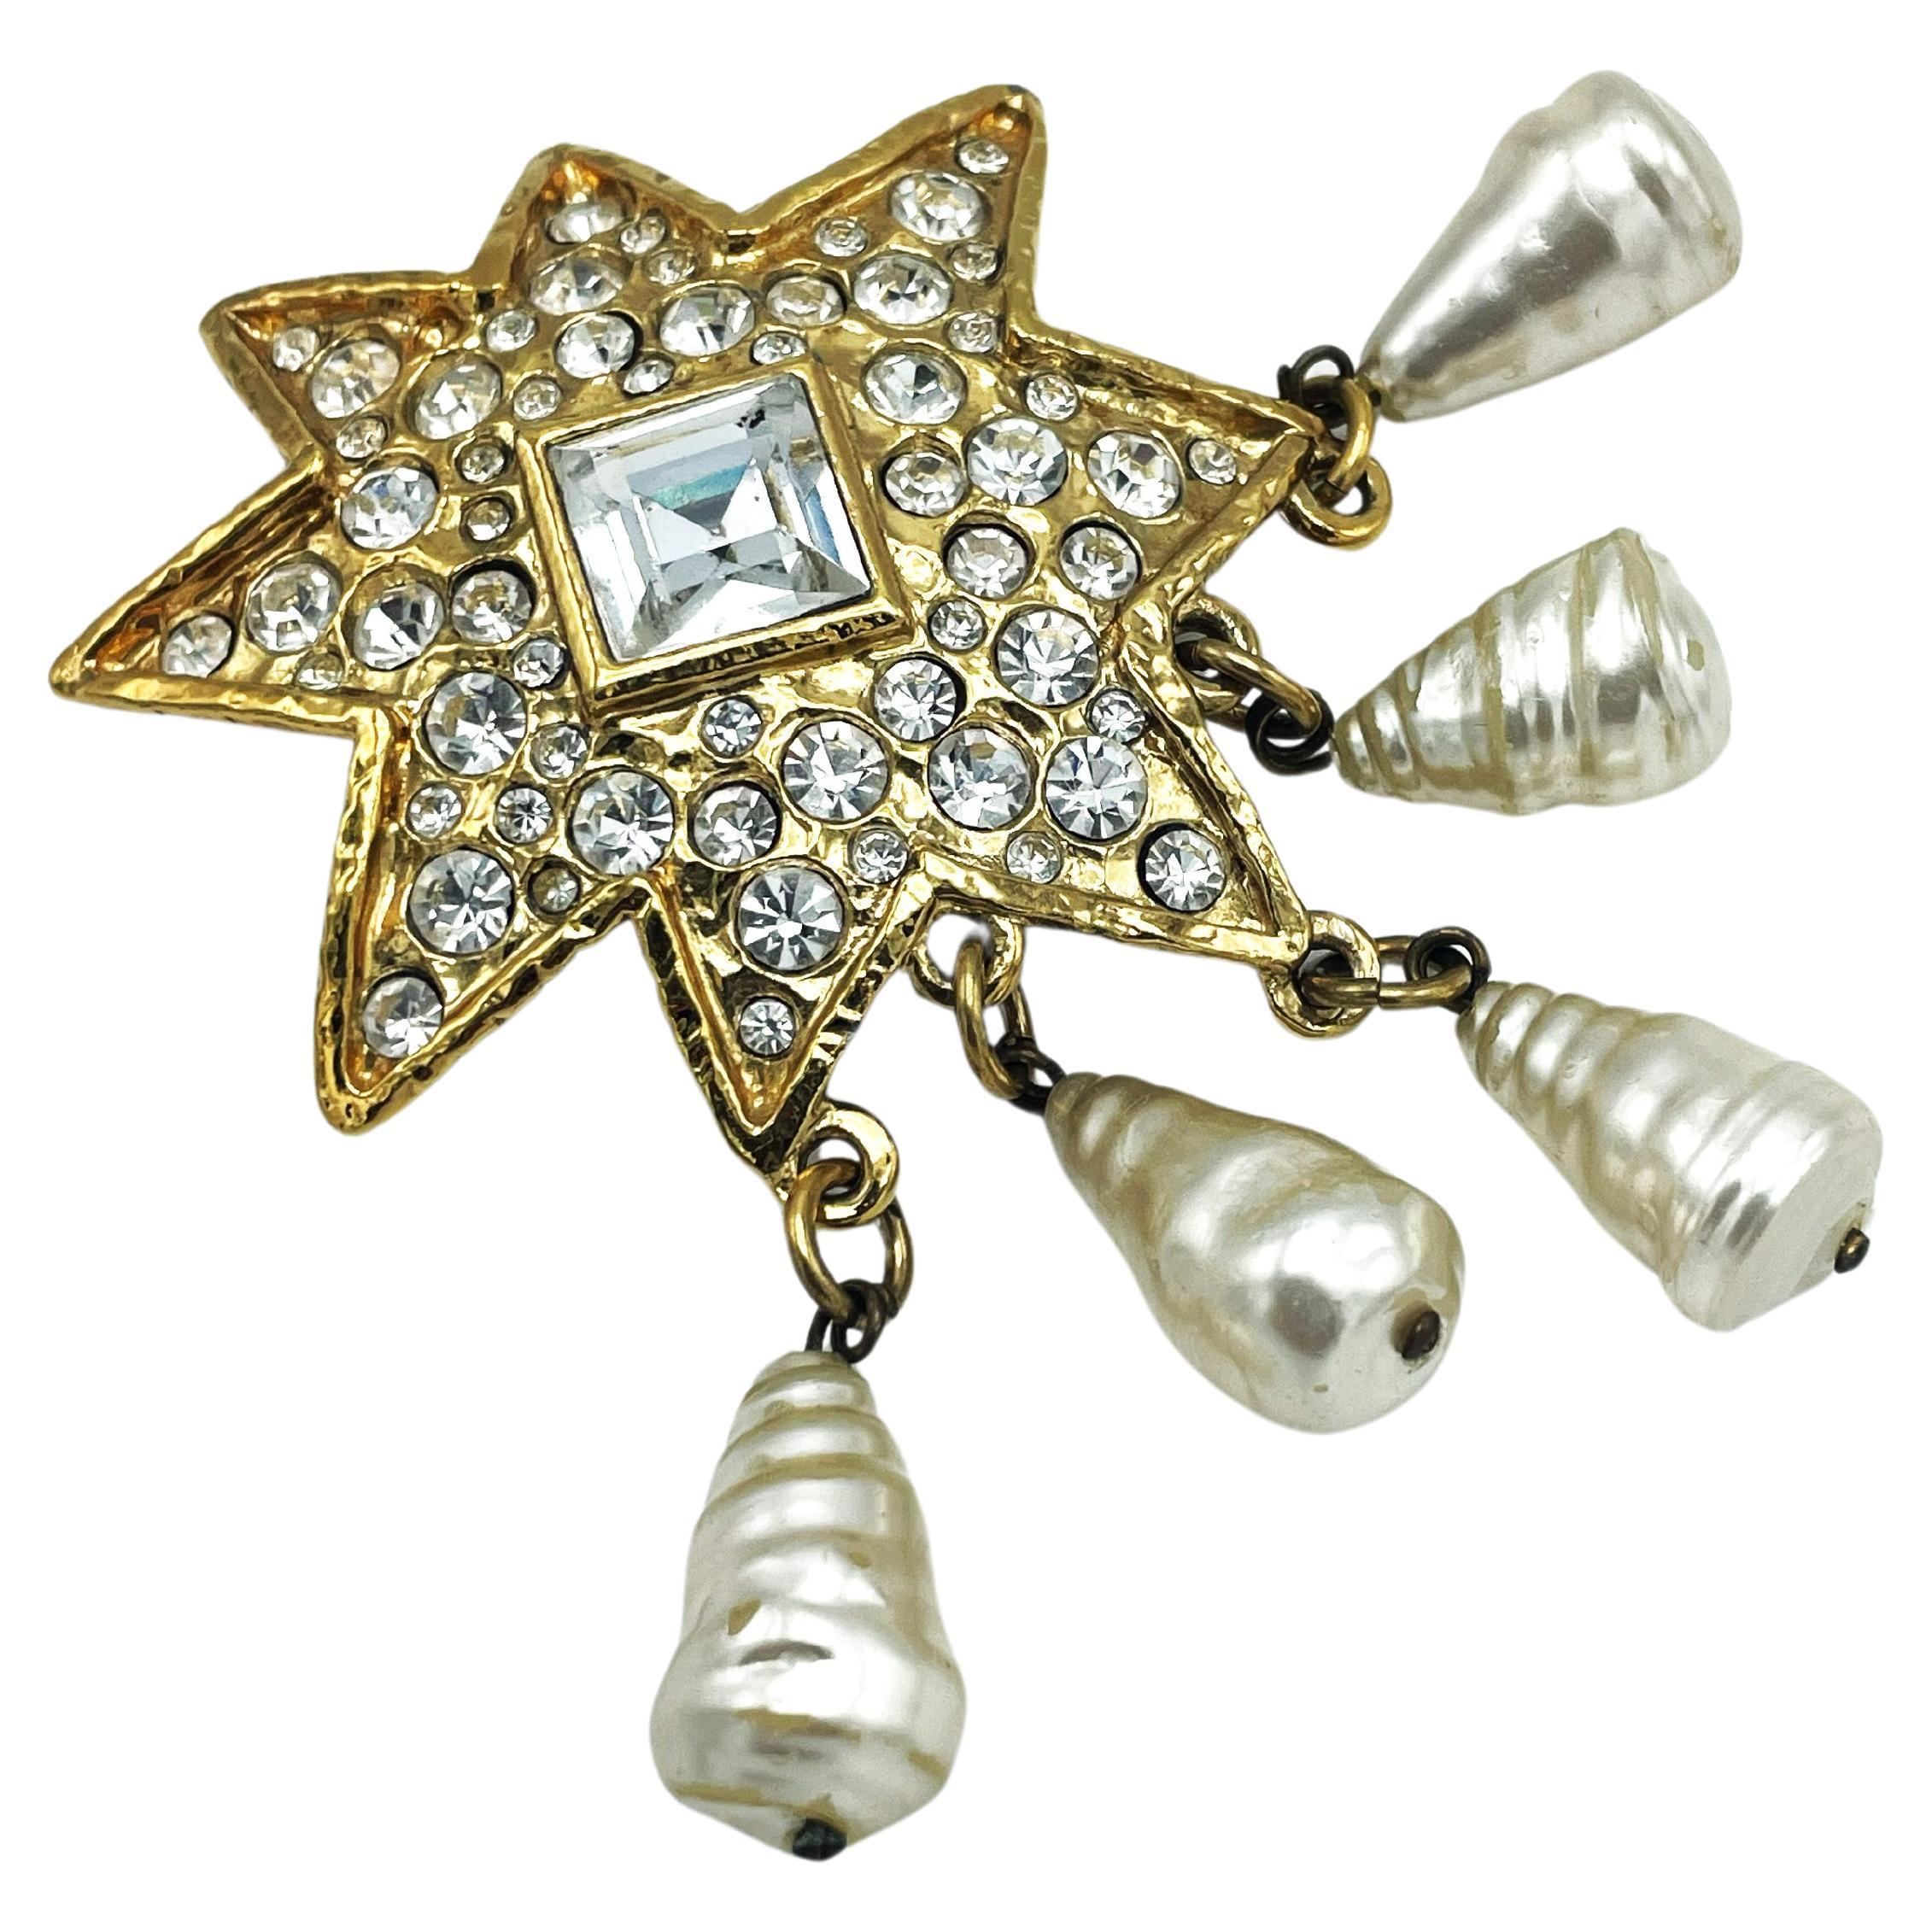 
CHRISTIAN LACROIX STAR BROOCH (Made in France) fully set with rhinestones.
In the middle there is a large cut square rhinestone stone measuring 1.5 x 1.5 cm 

Dimensions:  Star 5 x 5 cm, pearls 2,4 cm x 1,2 cm, full length9 cm

XMAS IS COMING SOON